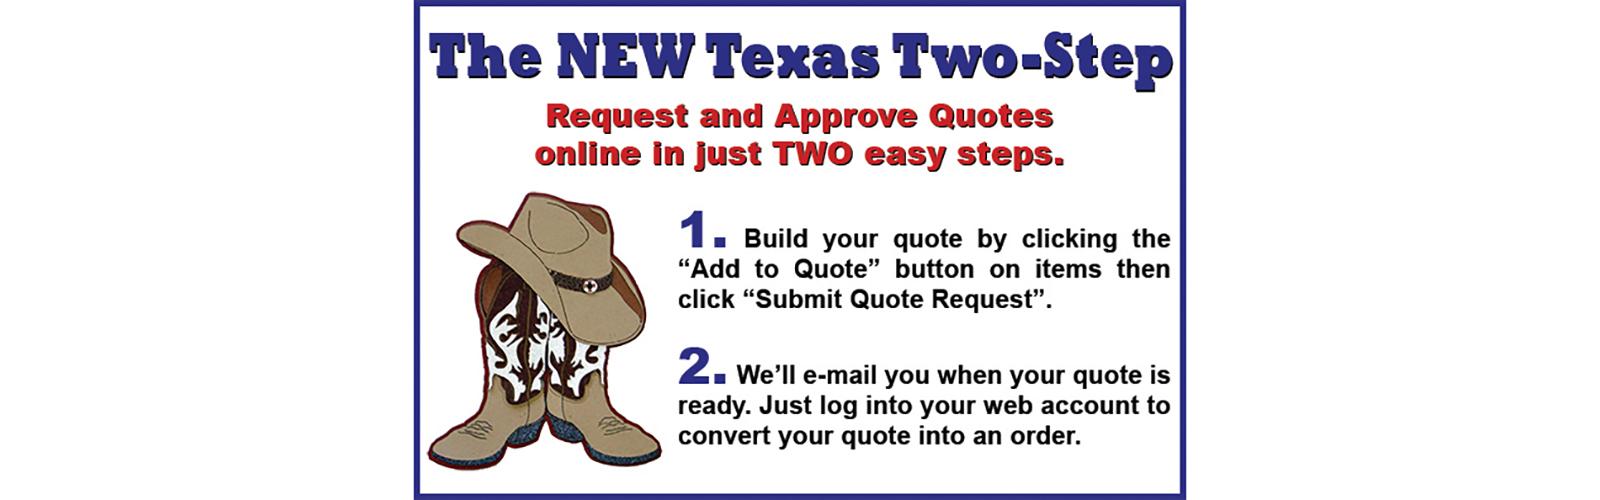 Request and approve quotes online in just two easy steps with our new quote request feature.